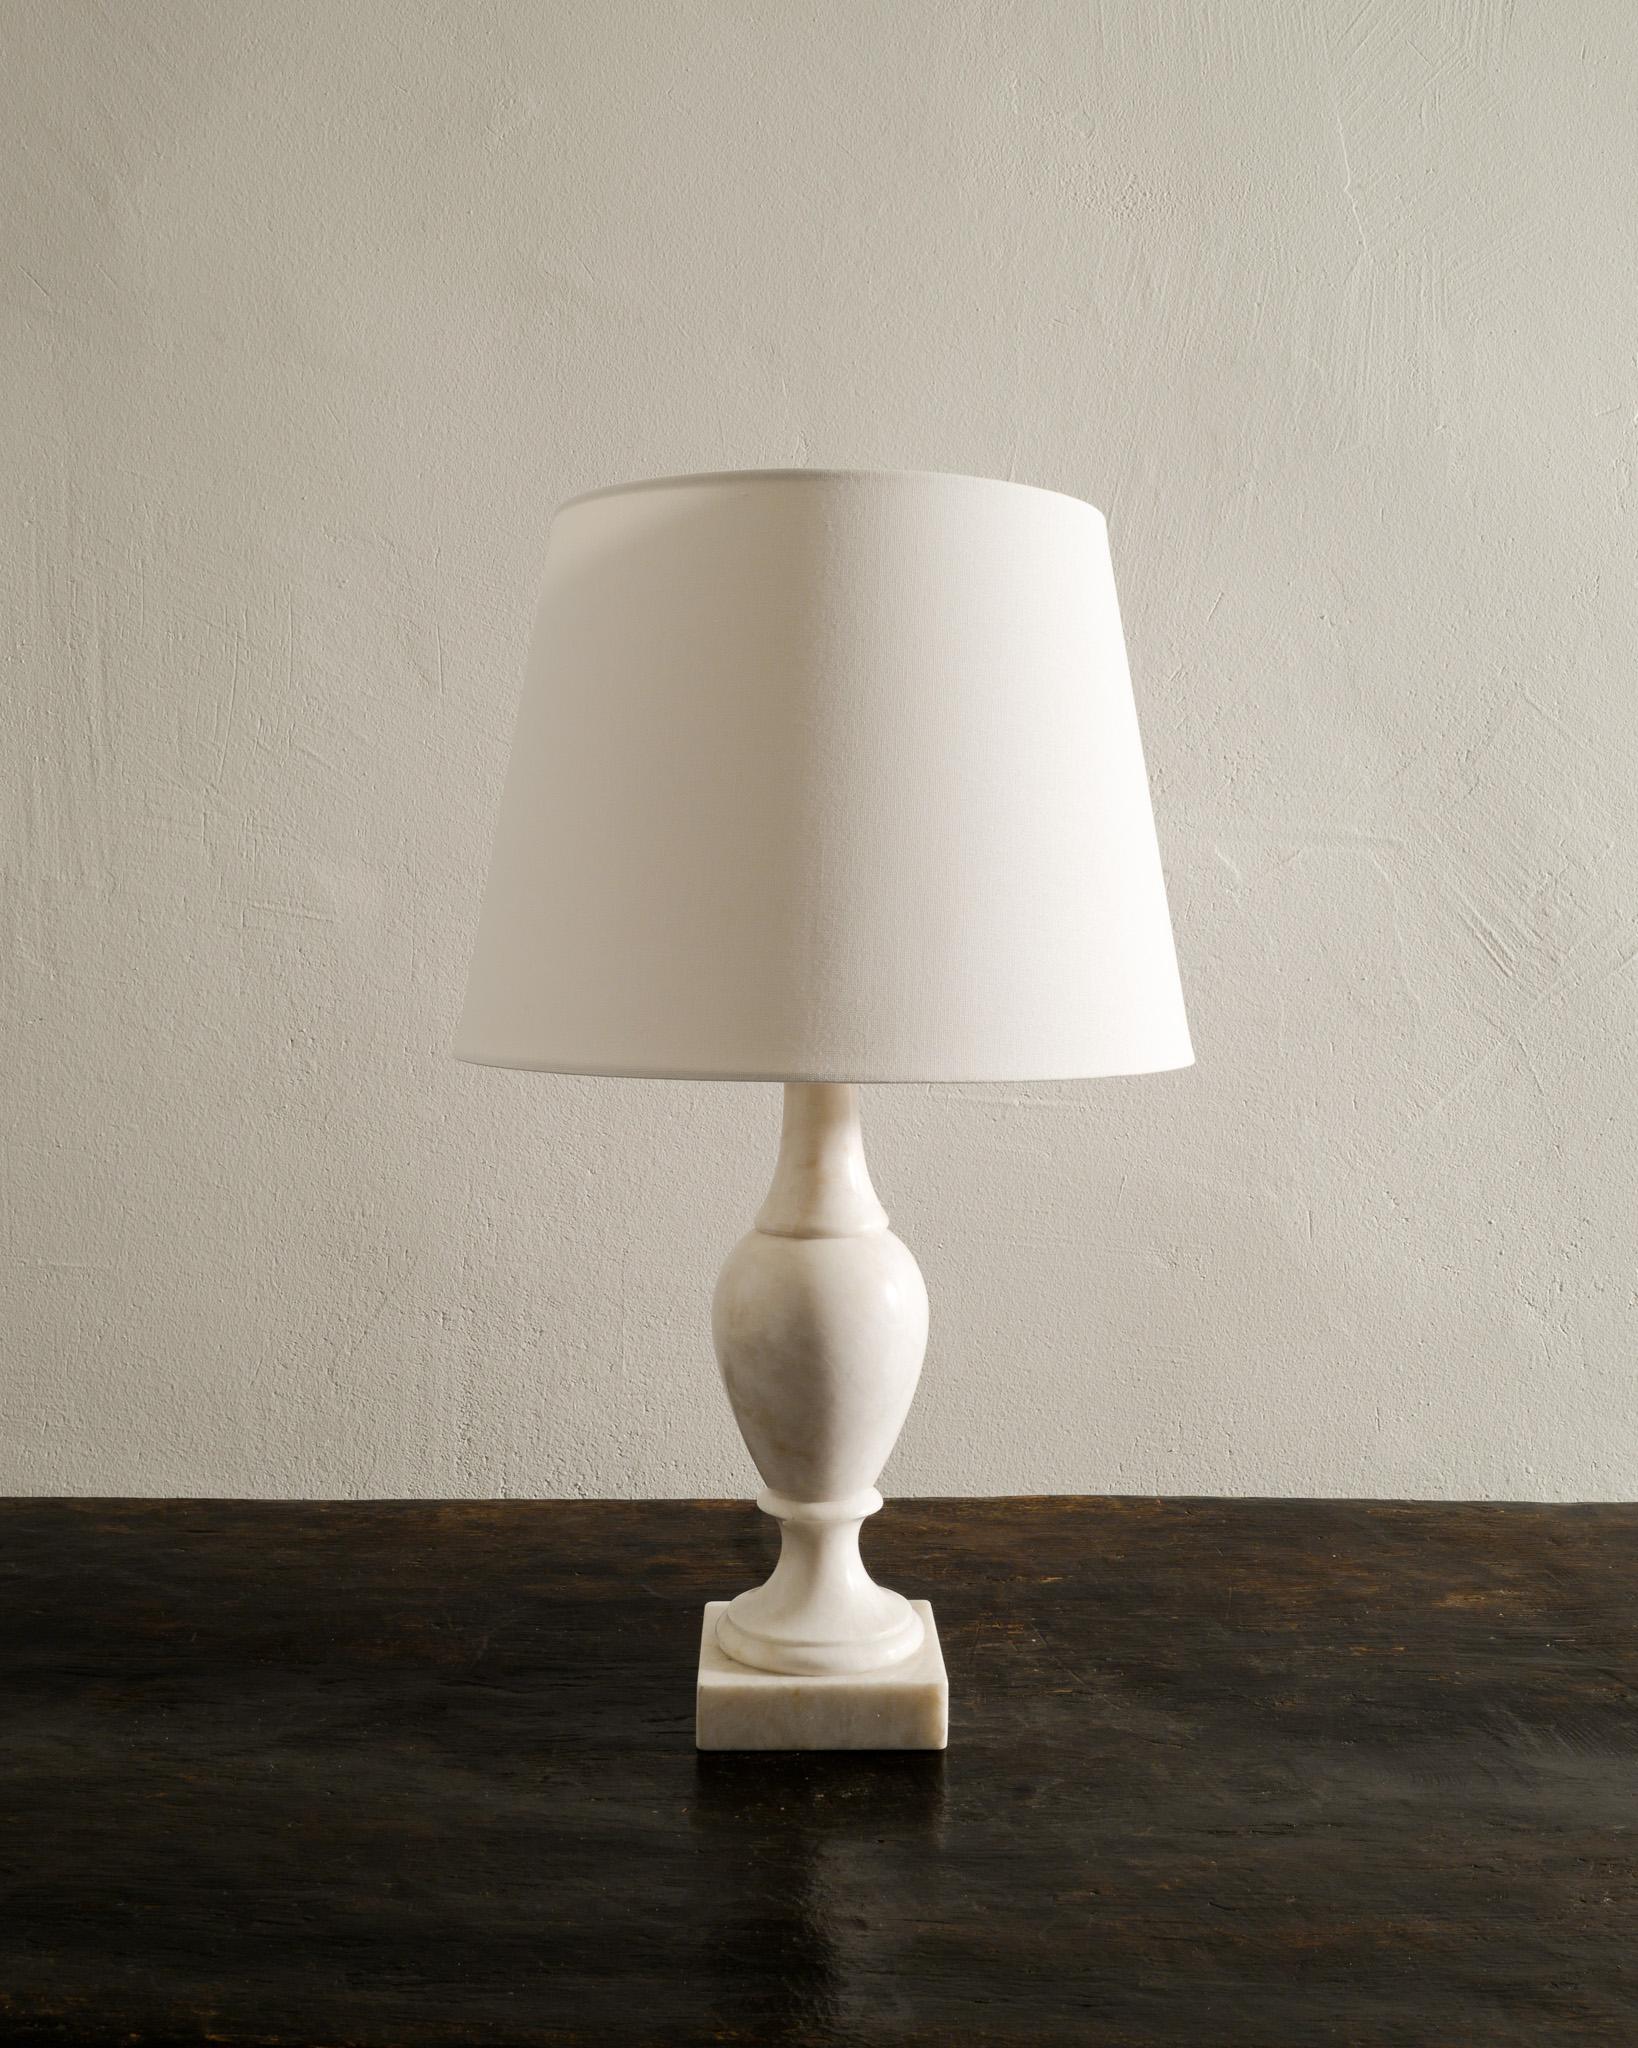 Beautiful mid century desk / table lamp in solid white marble by anonymous designer probably produced in Sweden around 1960s. In great original condition with minimal signs of age and use. Newer wiring. 
Shade is not included in the purchase.